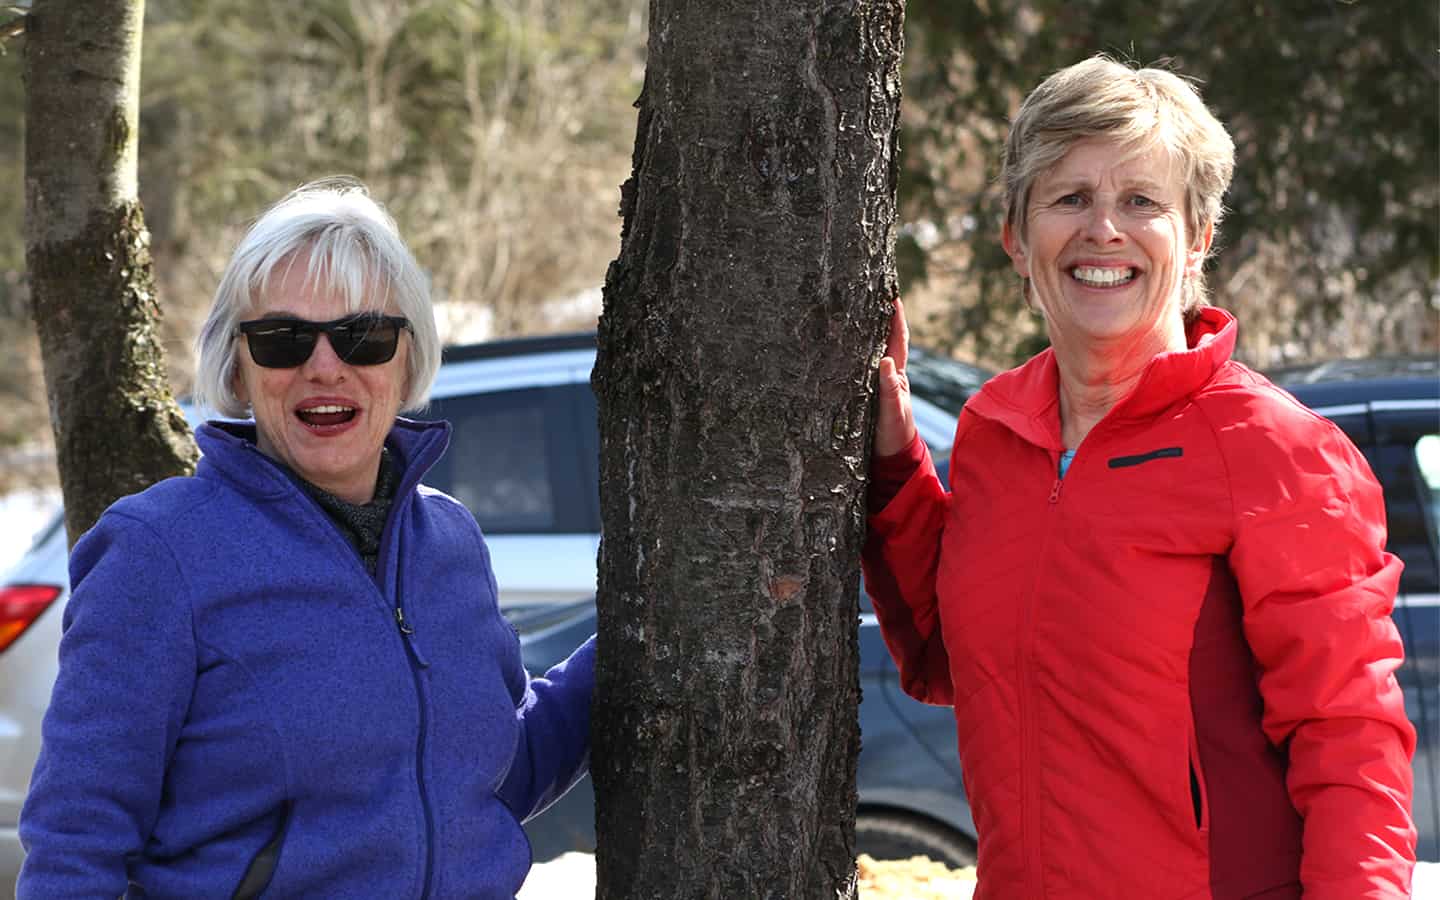 Local group pledges to plant 5,000 more trees this year